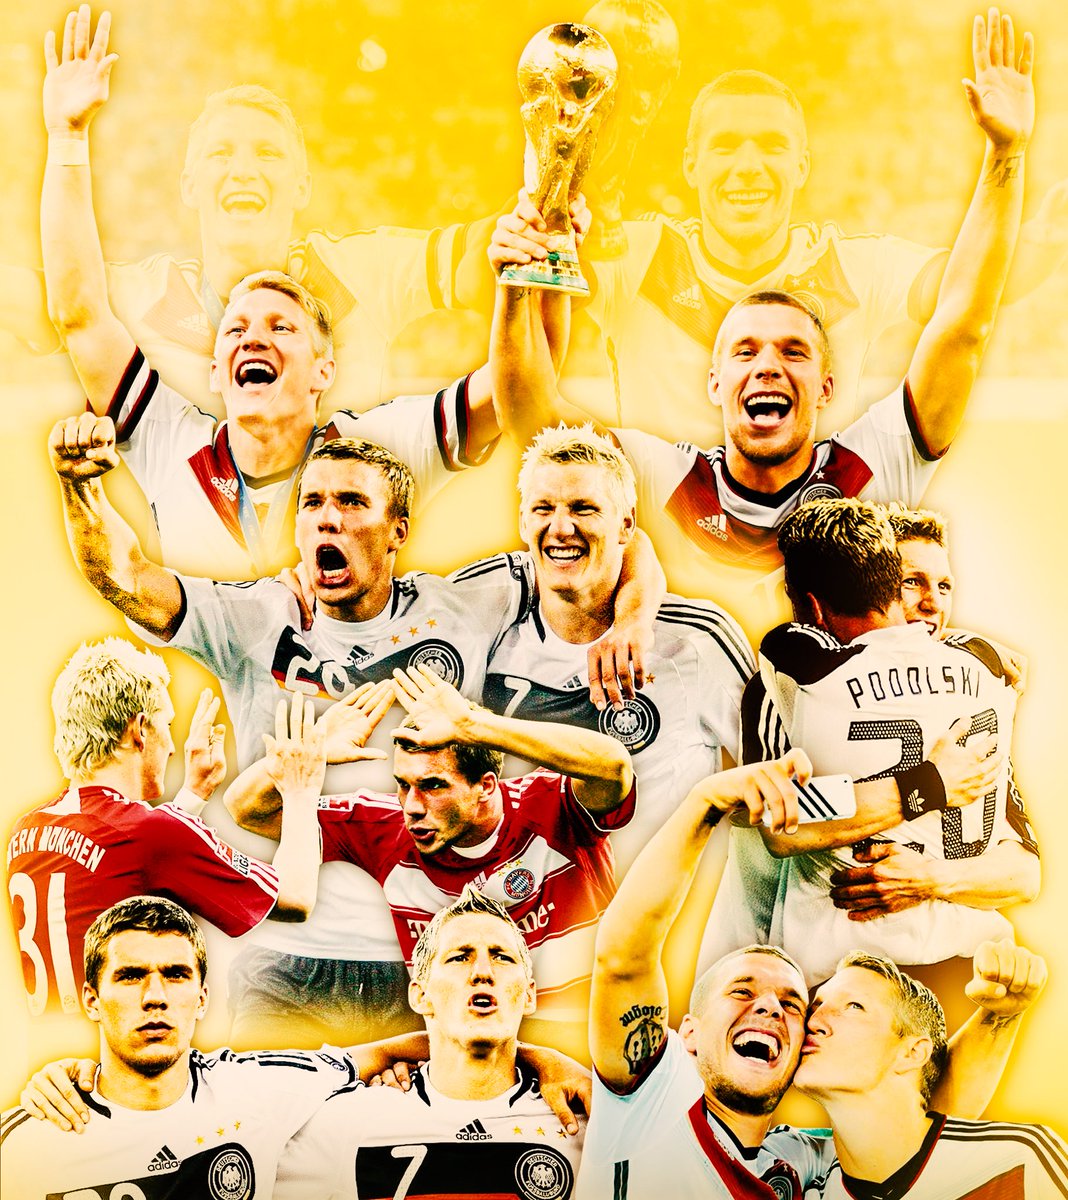 Lukas Podolski Com More Than A Teammate More Than A Legend We Had The Best Moments Together On And Off The Pitch All Around The World You Will Always Be Remembered Winning